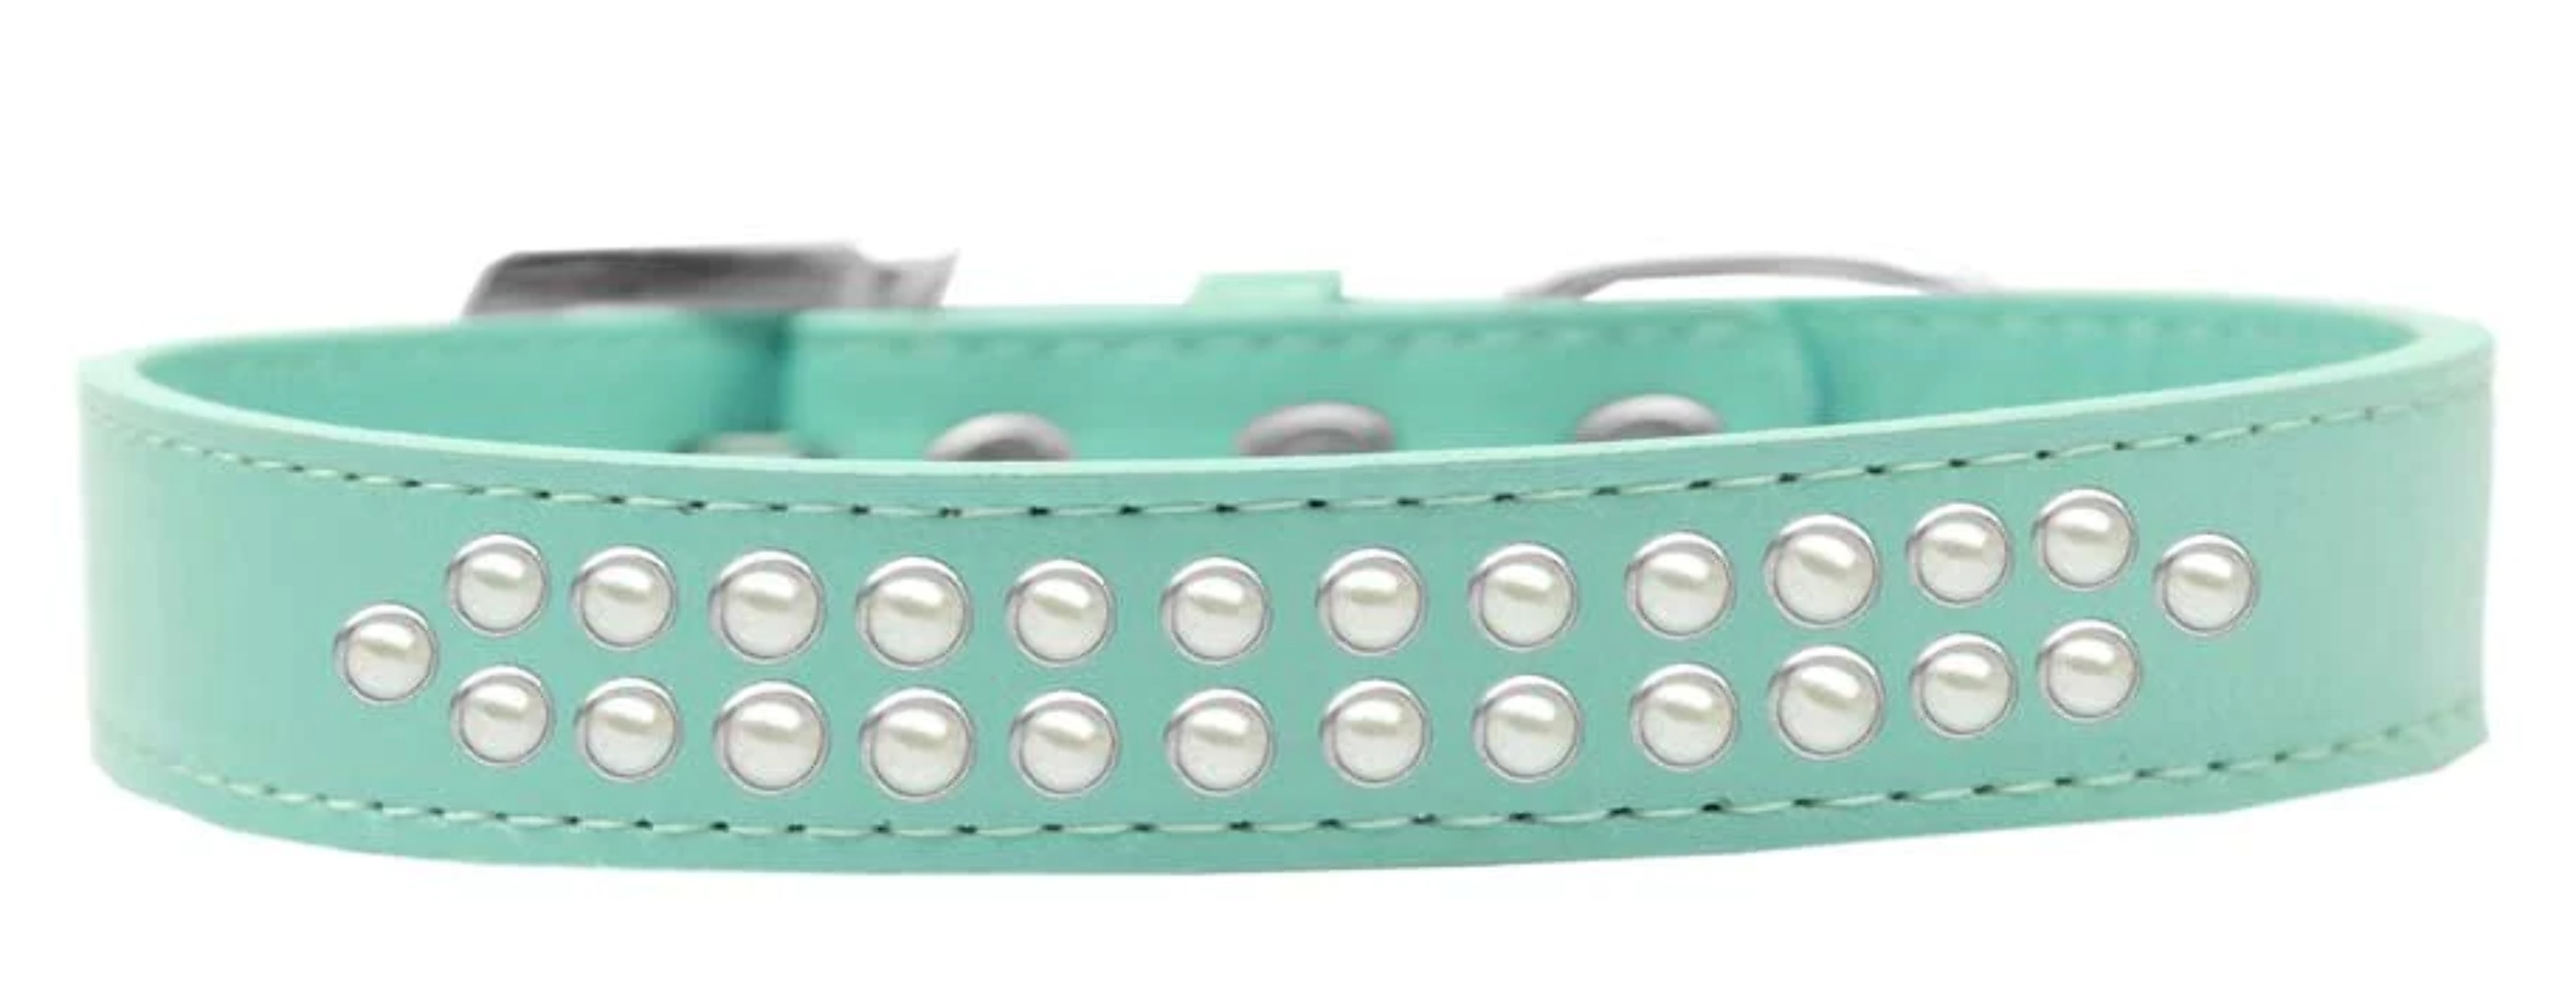 Mirage Pet Products613-03 LPK-14 Two Row Pearl Dog Collar, Light Pink - Size 14 - image 3 of 9